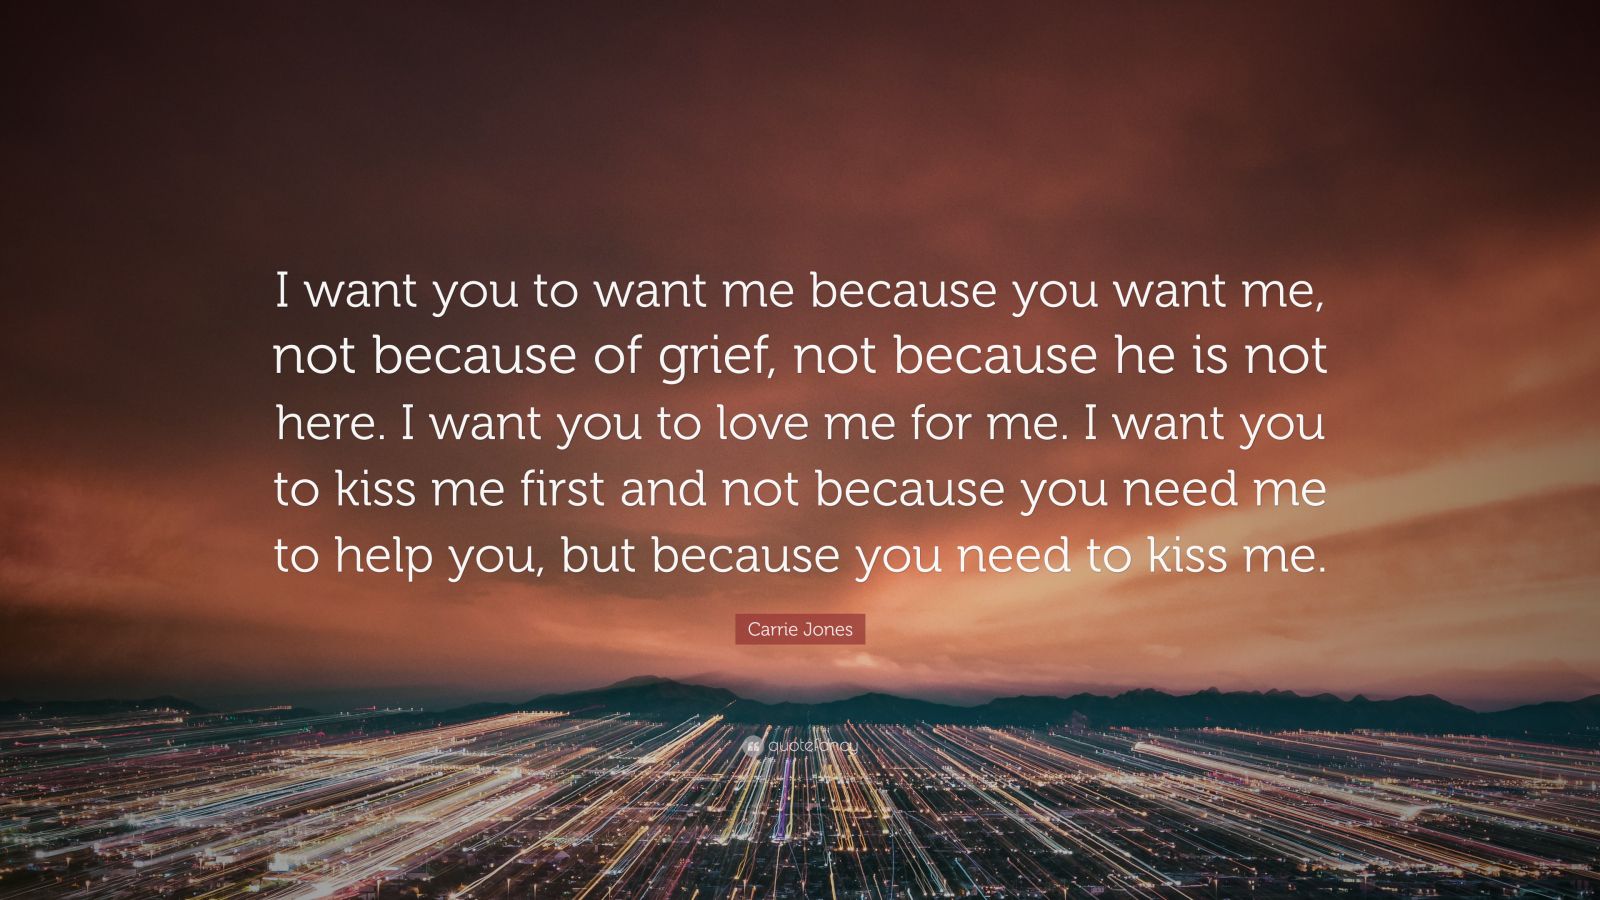 Carrie Jones Quote: “I want you to want me because you want me, not ...